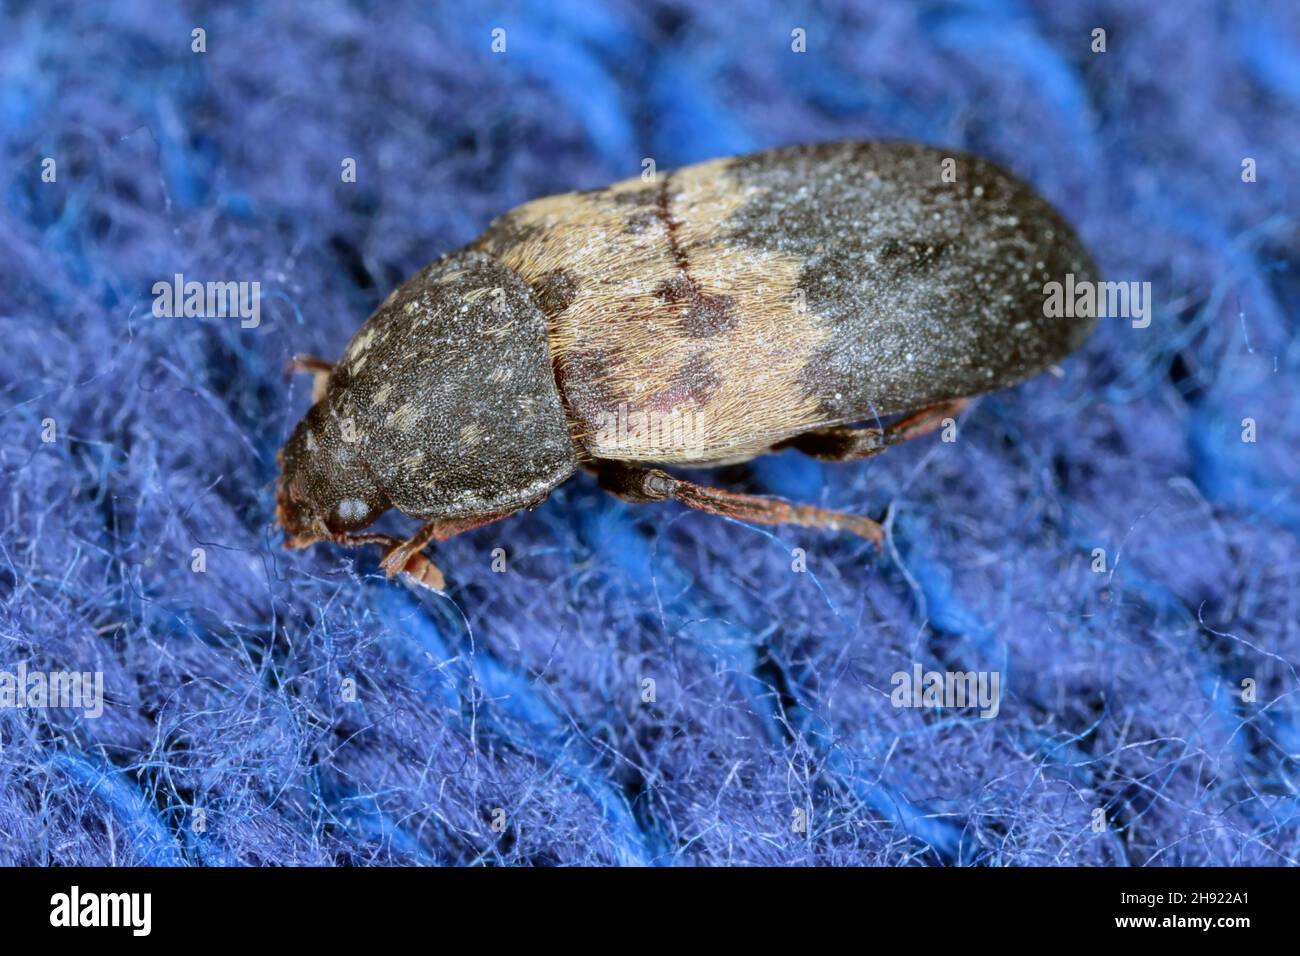 Dermestes lardarius, commonly known as the larder beetle from the family Dermestidae a skin beetles. Stock Photo